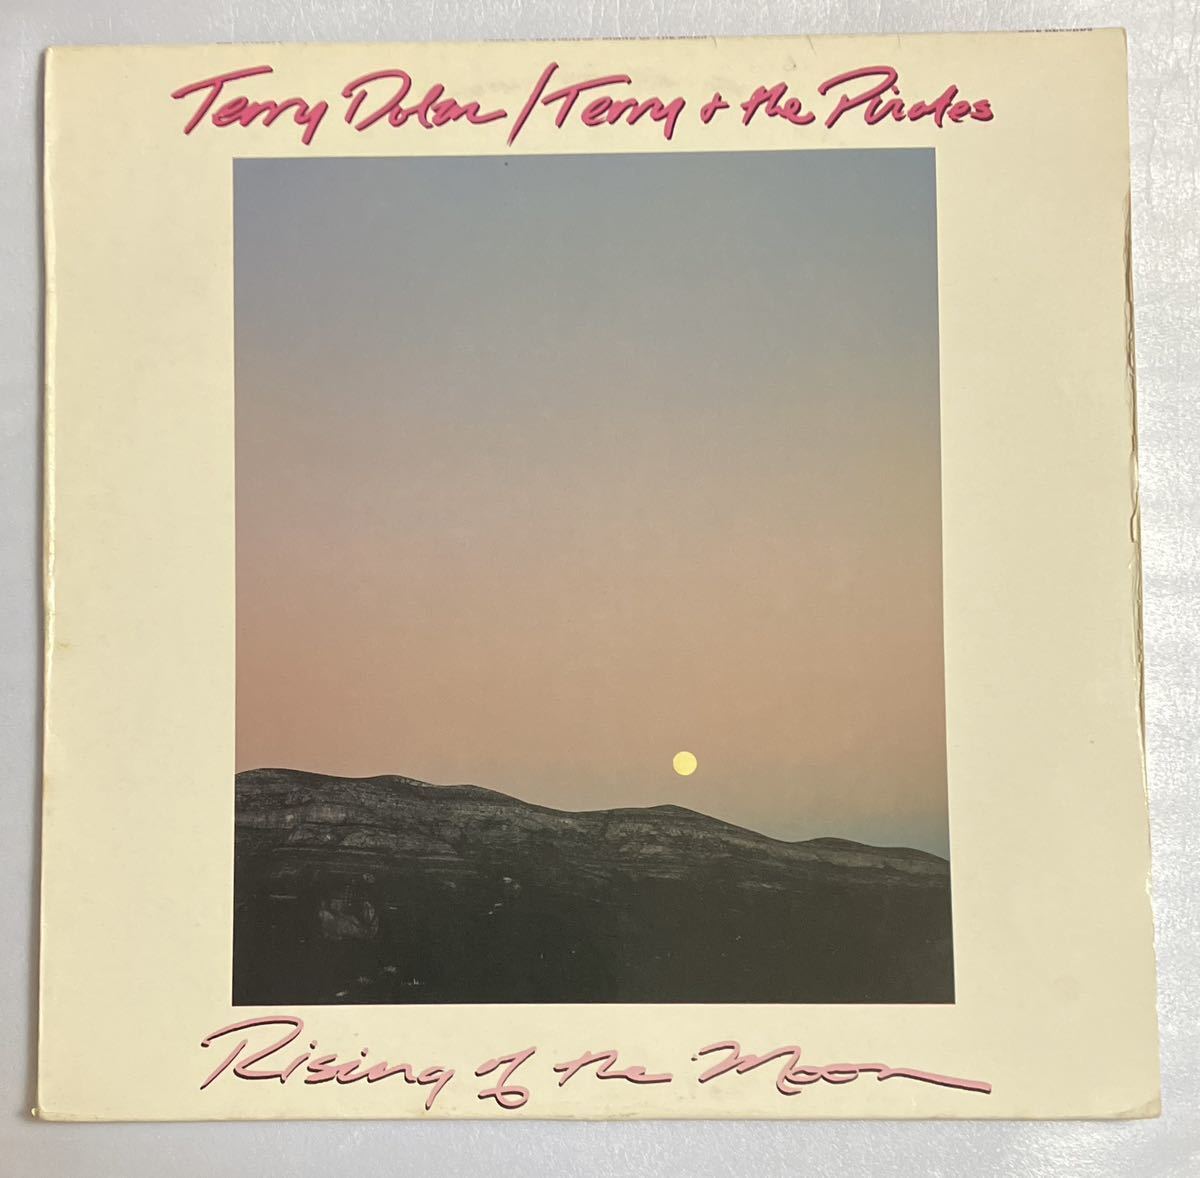 Terry Dolan, Terry & The Pirates「Rising Of The Moon」[輸入盤レコード] LP, テリー・ドーラン, Nicky Hopkins, Pete Sear_画像1